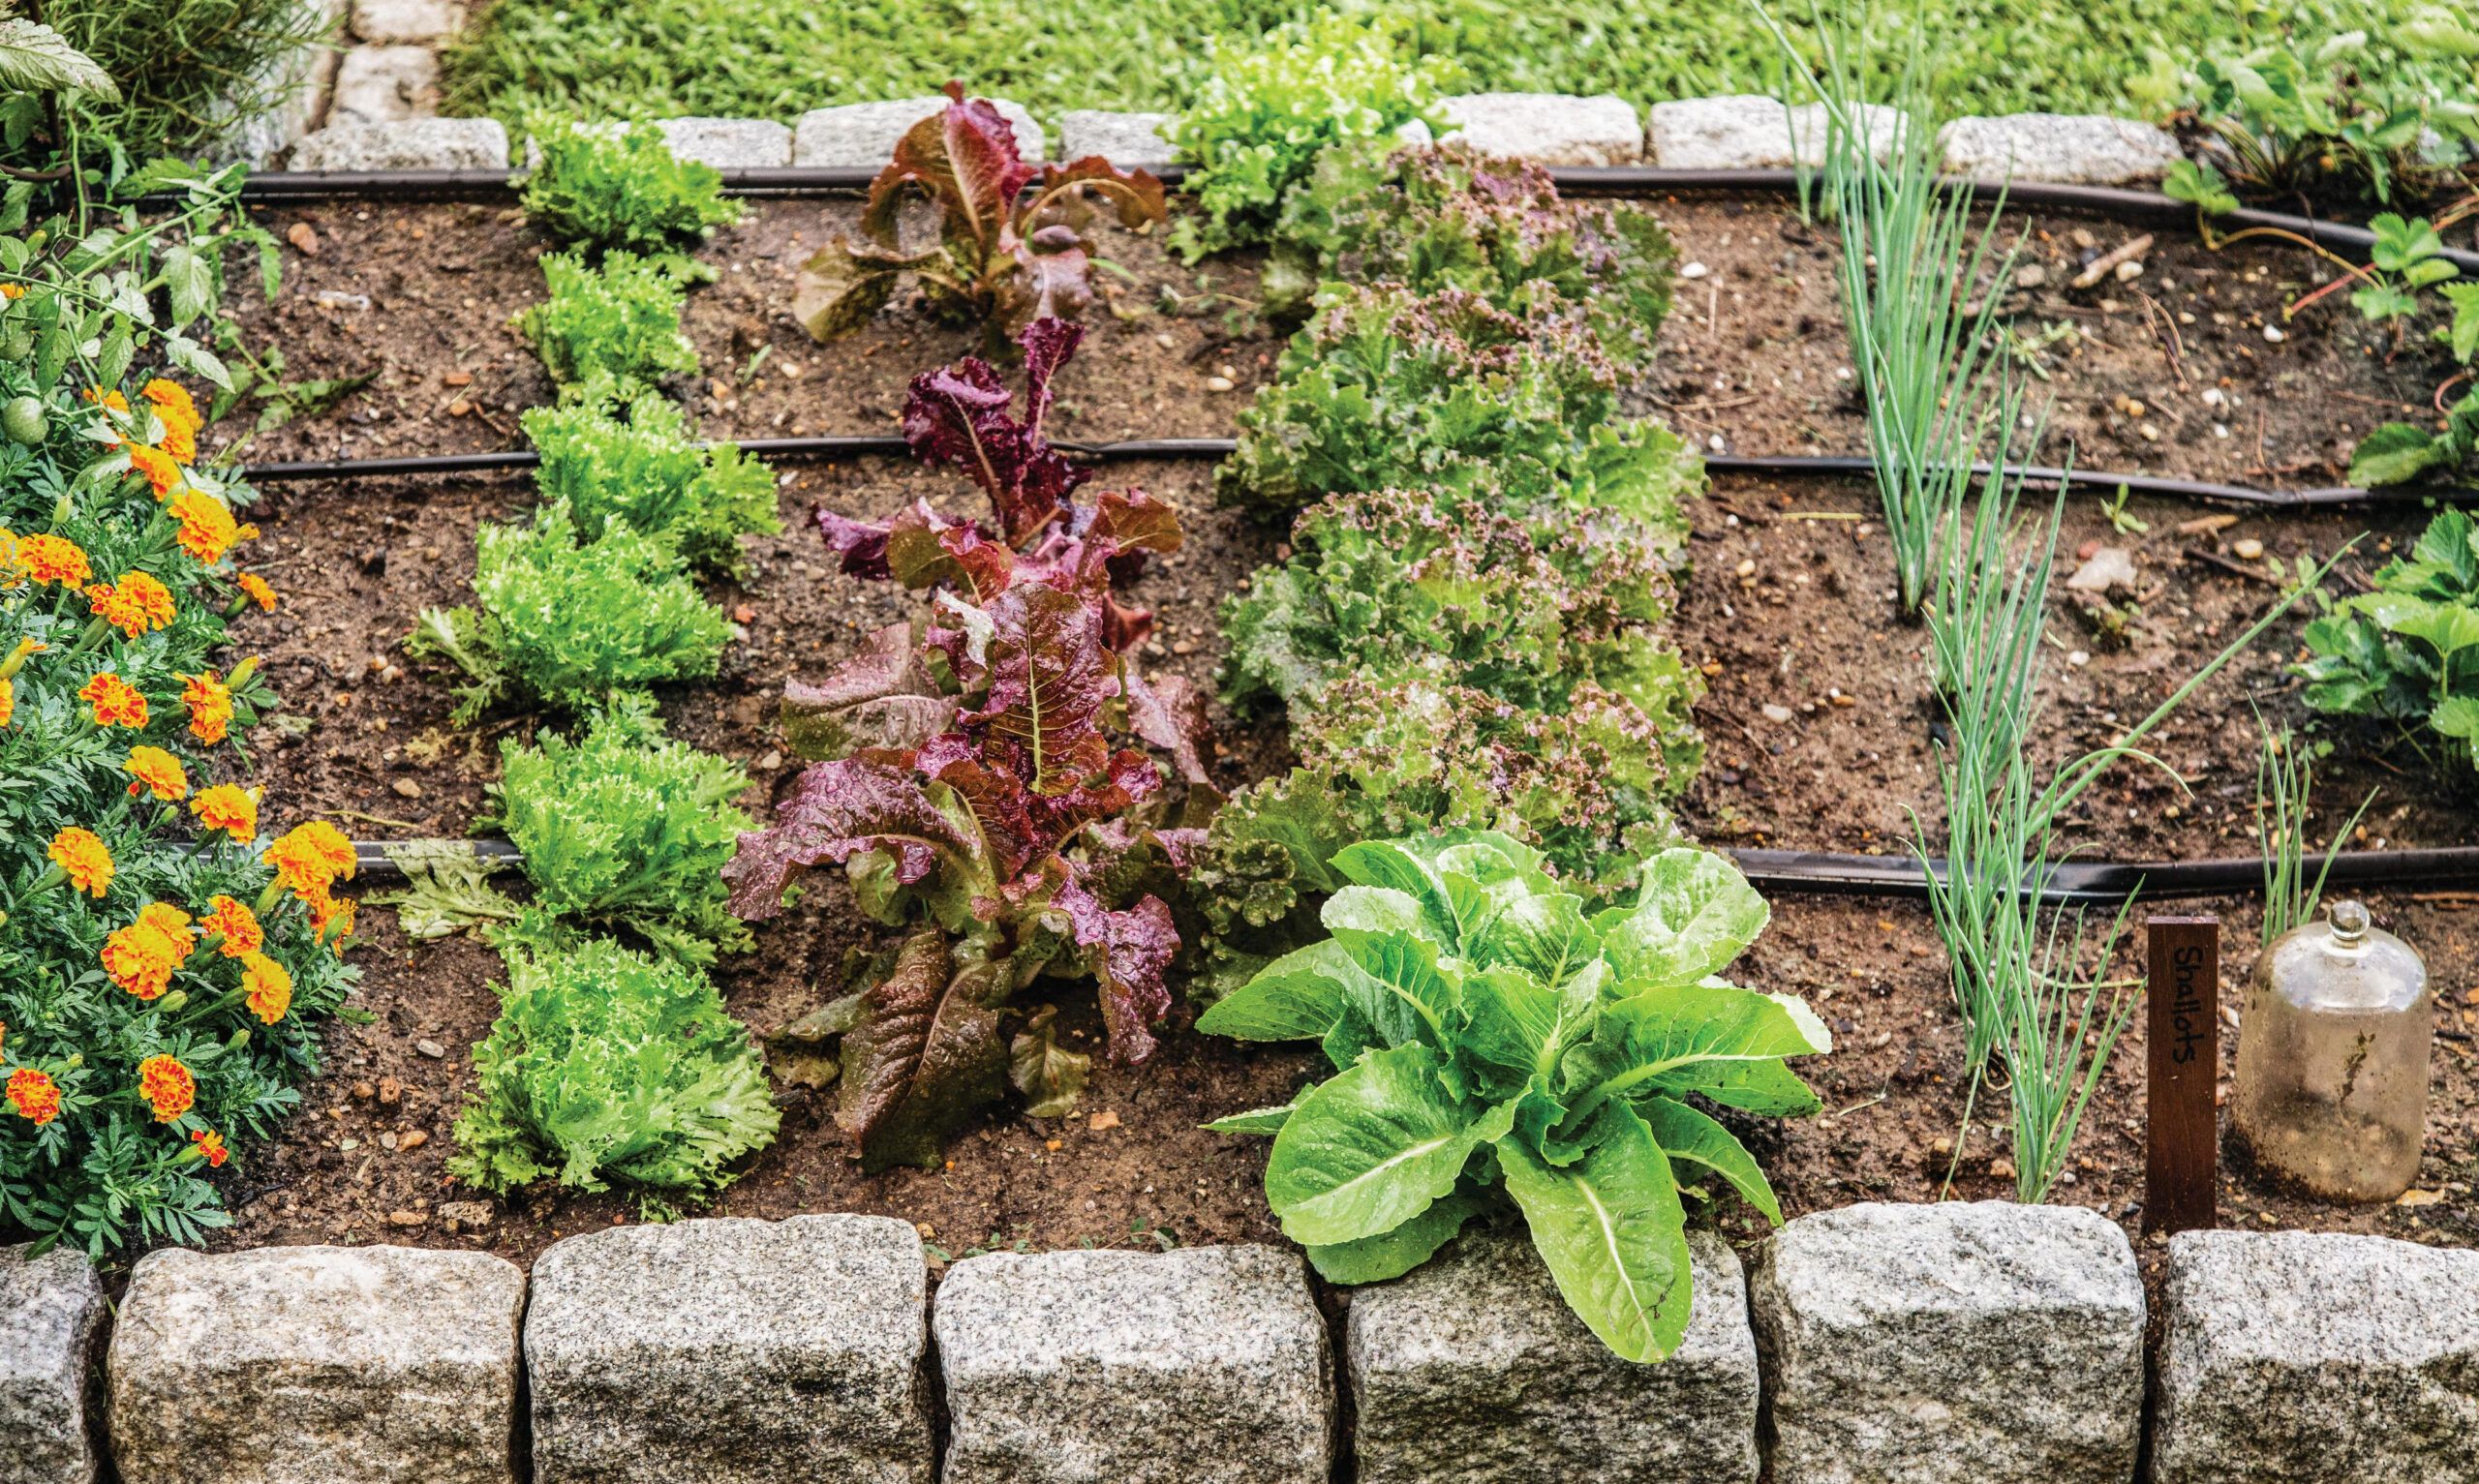 Gardening Tips: 8 Easy Steps To Set Up A Kitchen Garden At Home